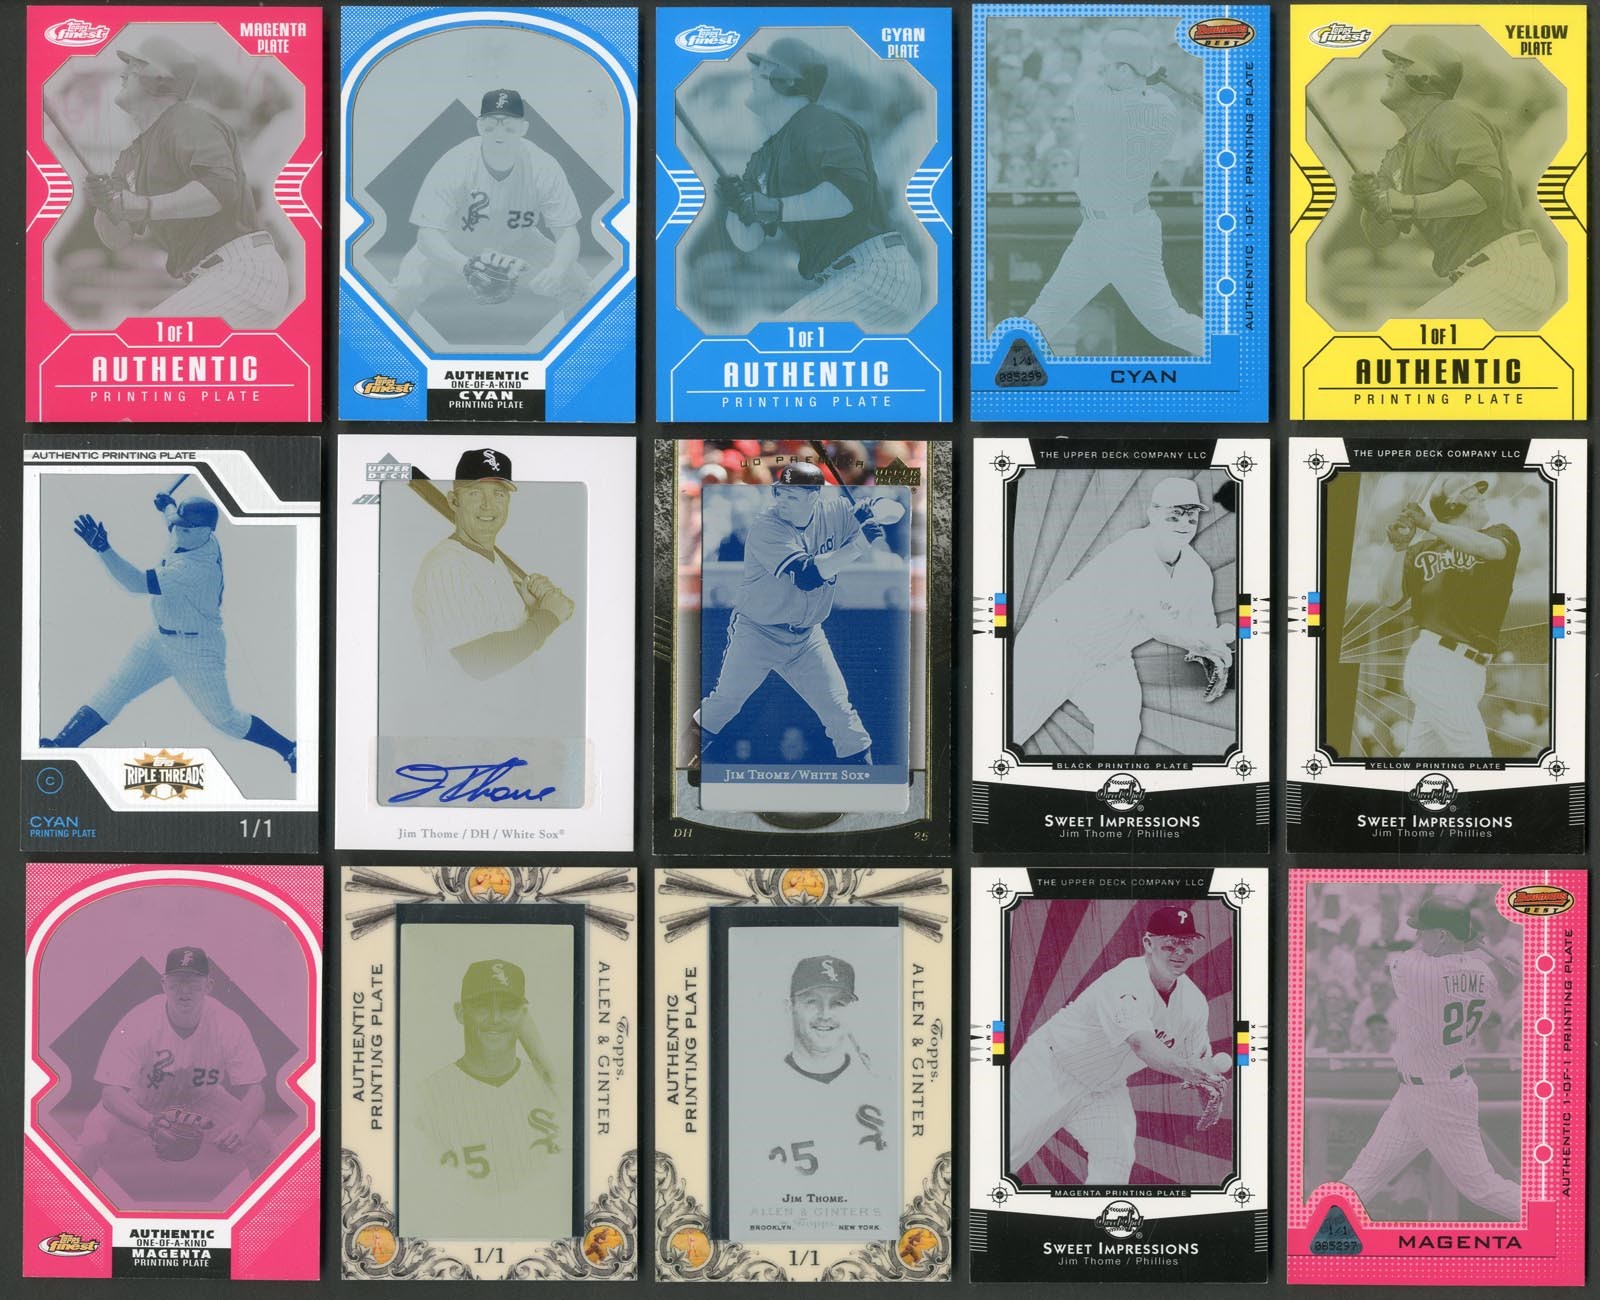 Jim Thome Master Collection - Massive Jim Thome 1 of 1 Printing Plate Collection (150+)